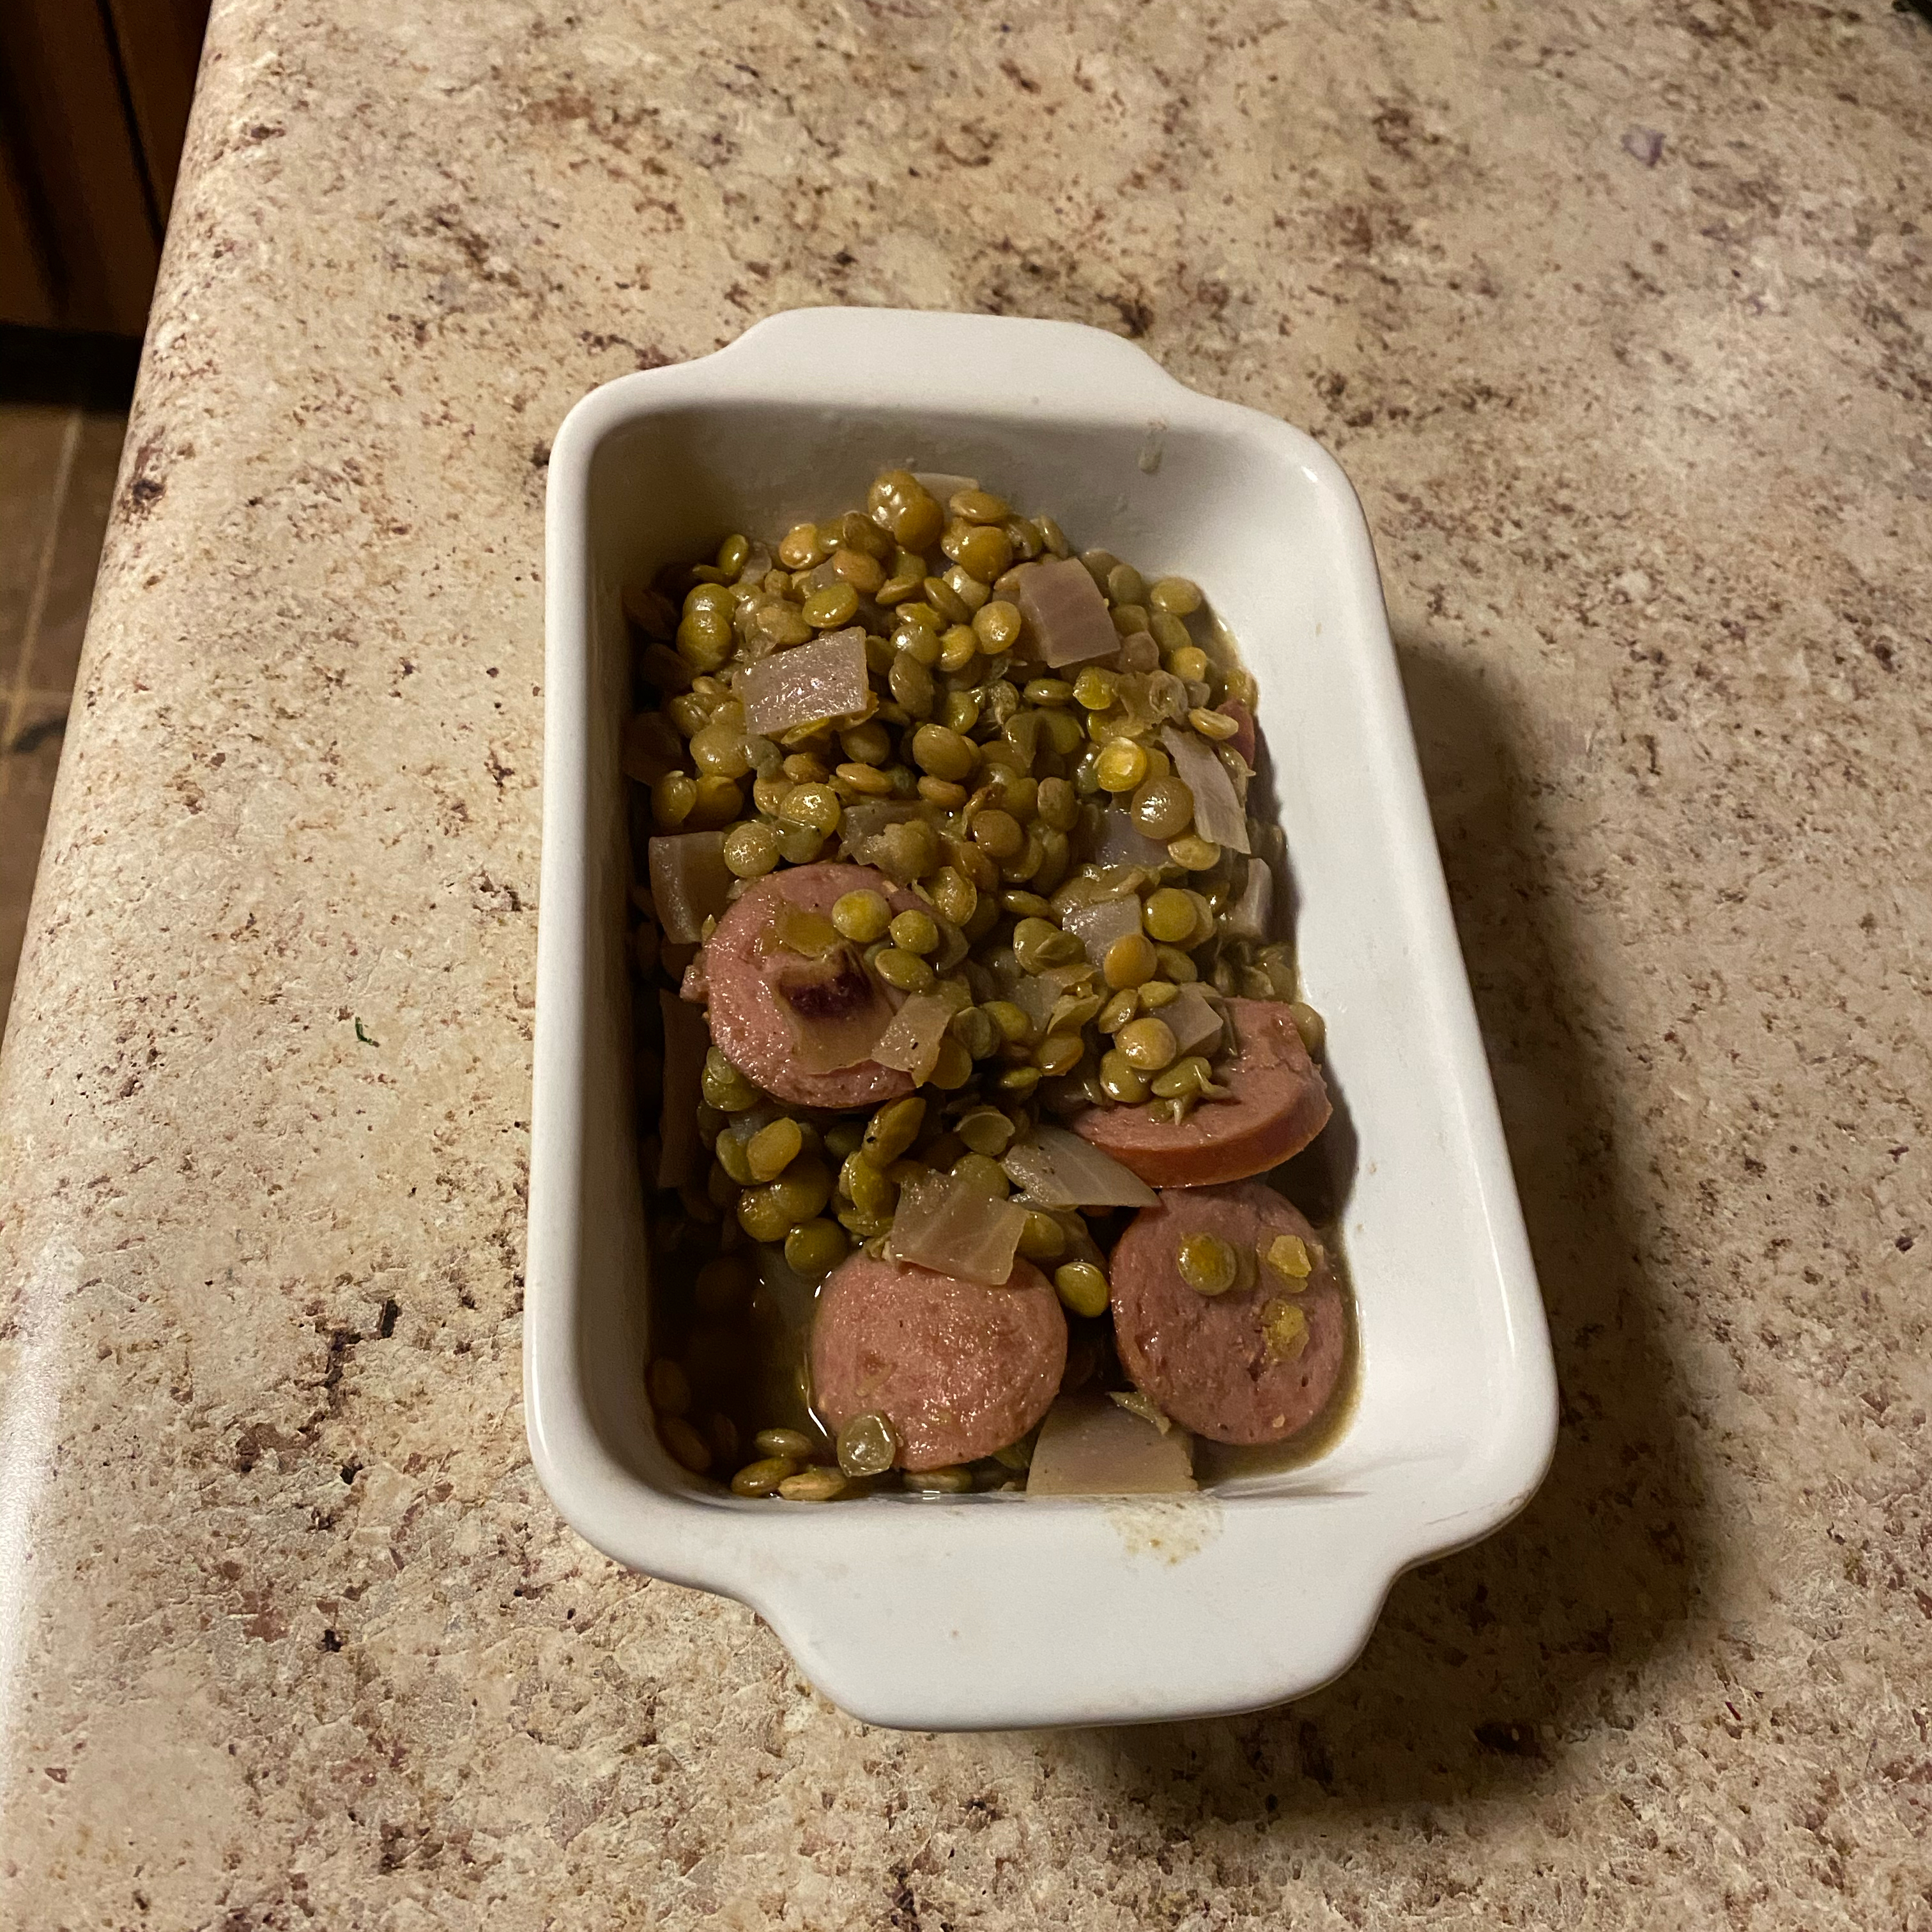 Sausage and Lentils 